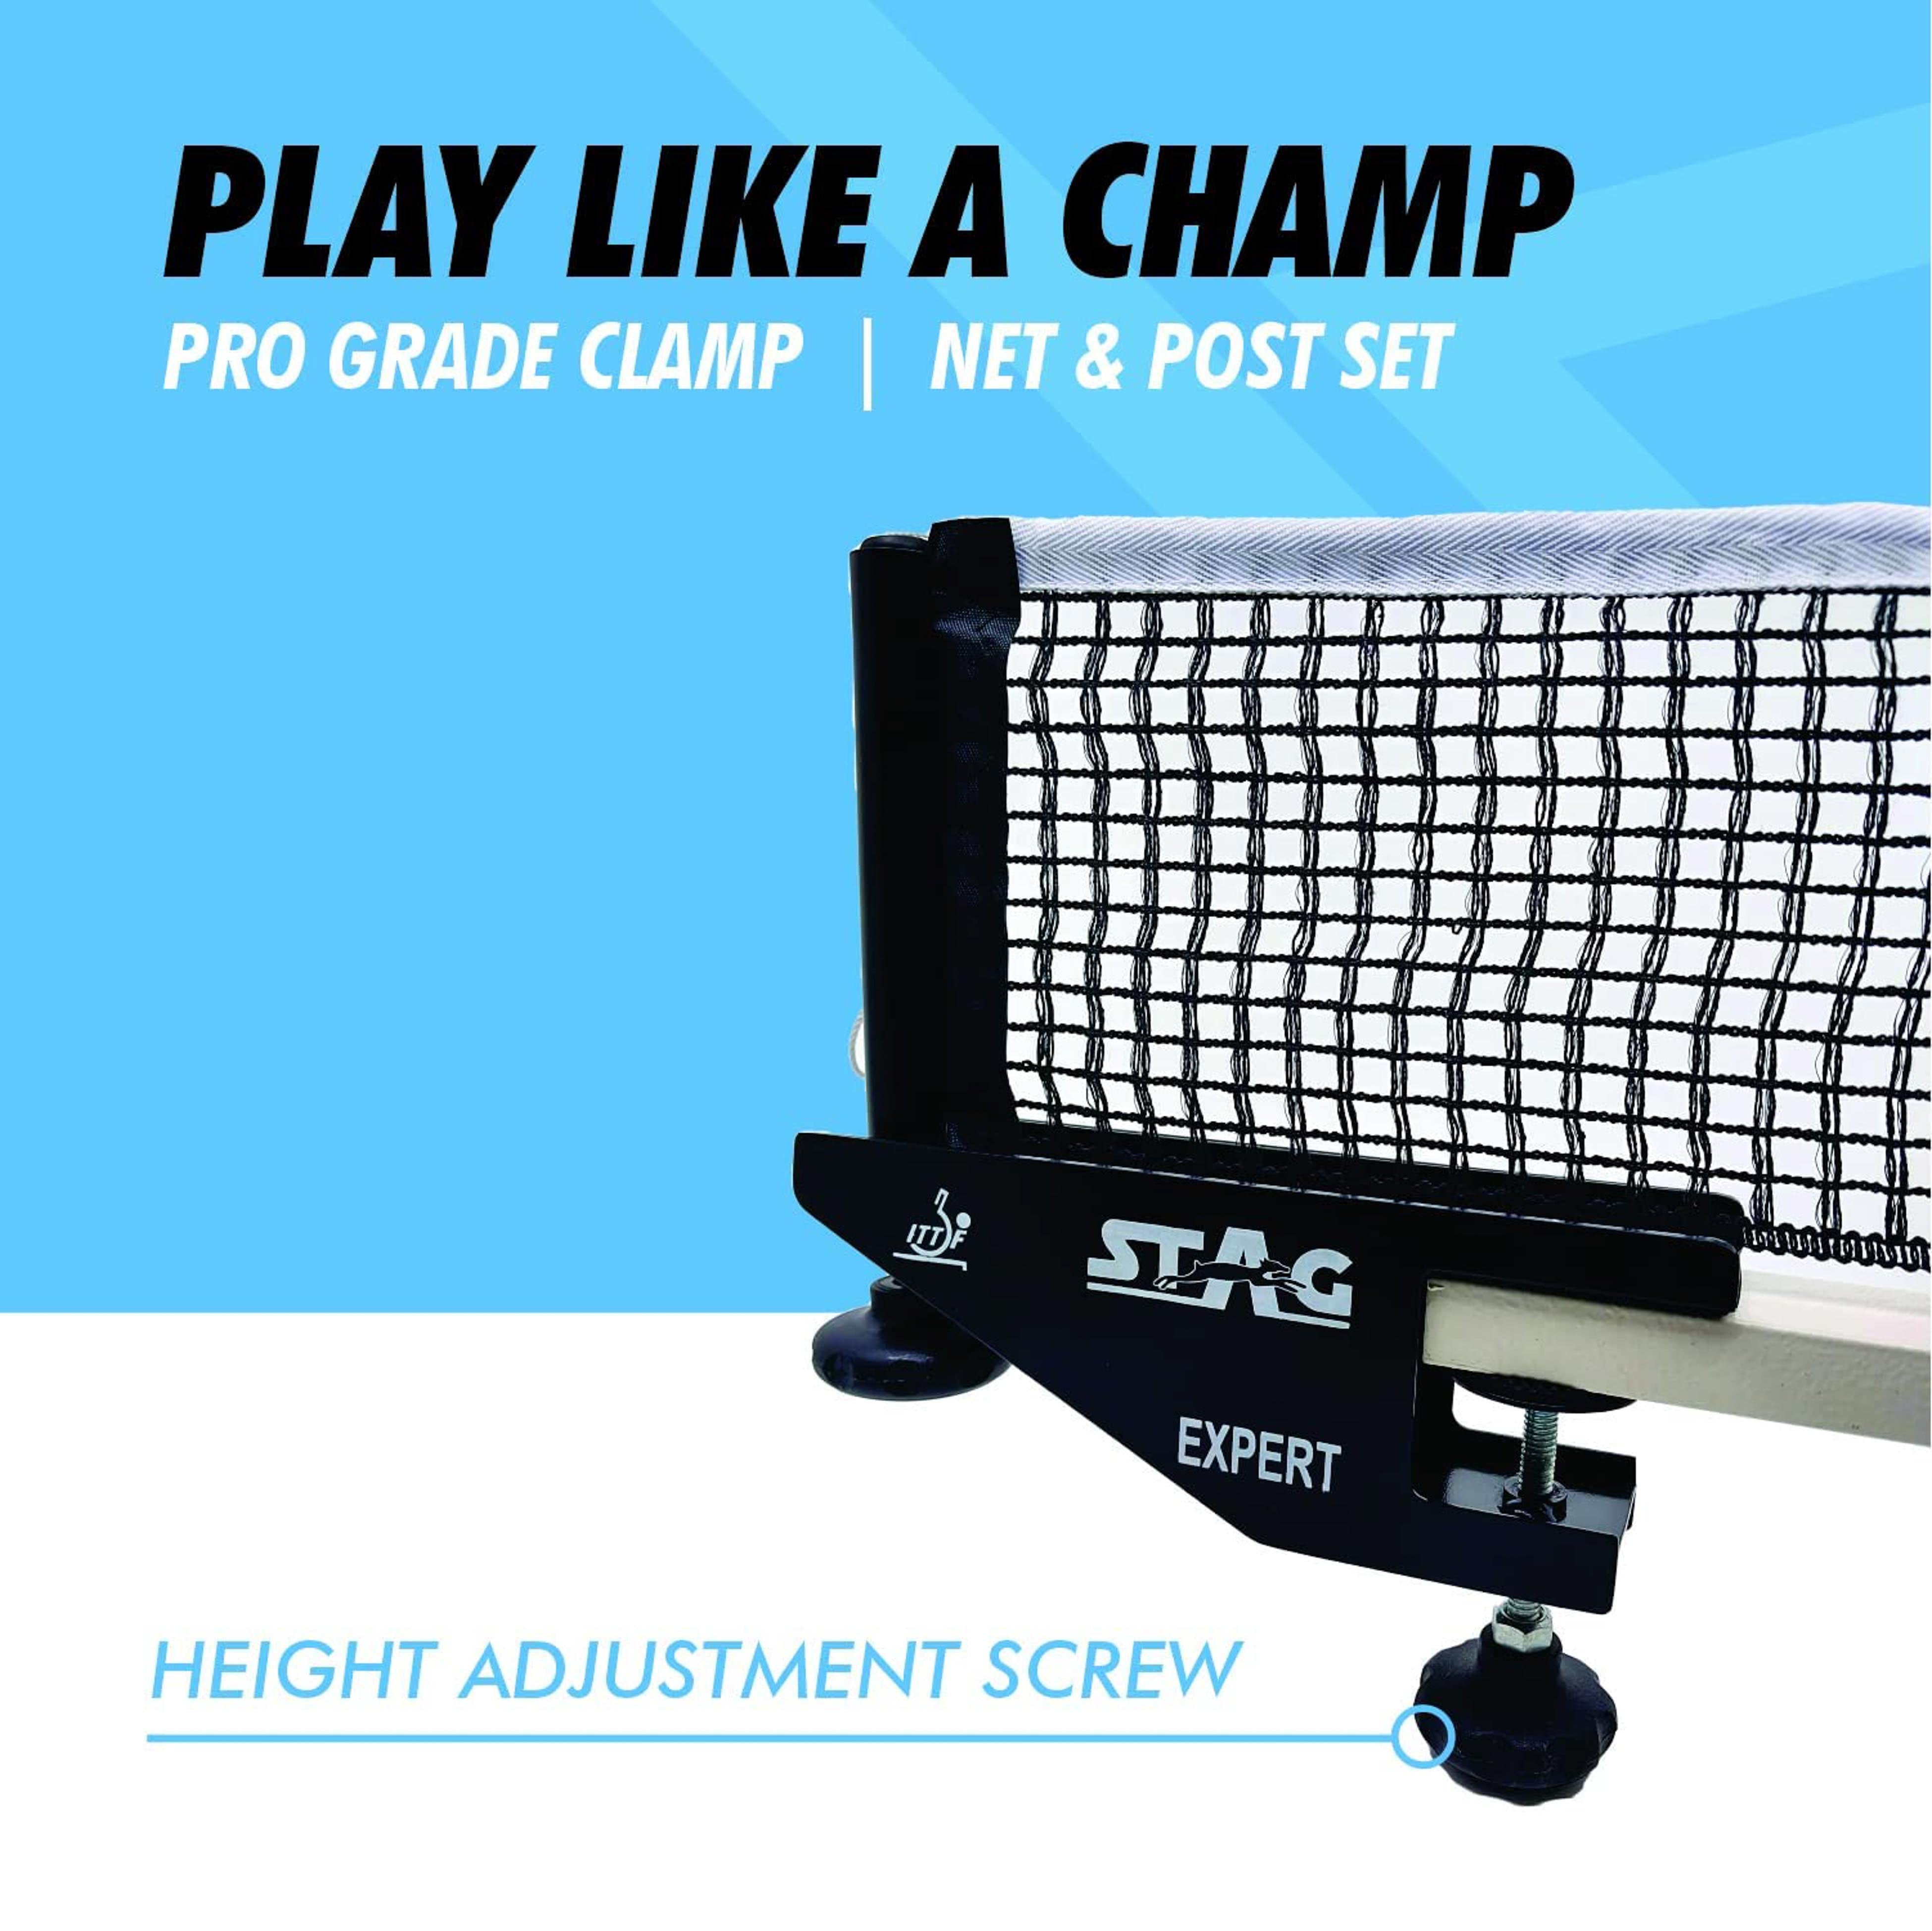 Stag Iconic Professional Grade Table Tennis Net & Post Set | Quick Easy Assembly with Spring Activated Clamp Net | Indoor & Outdoor Compatible Ping Pong Table Net Post - (Alloy Steel)